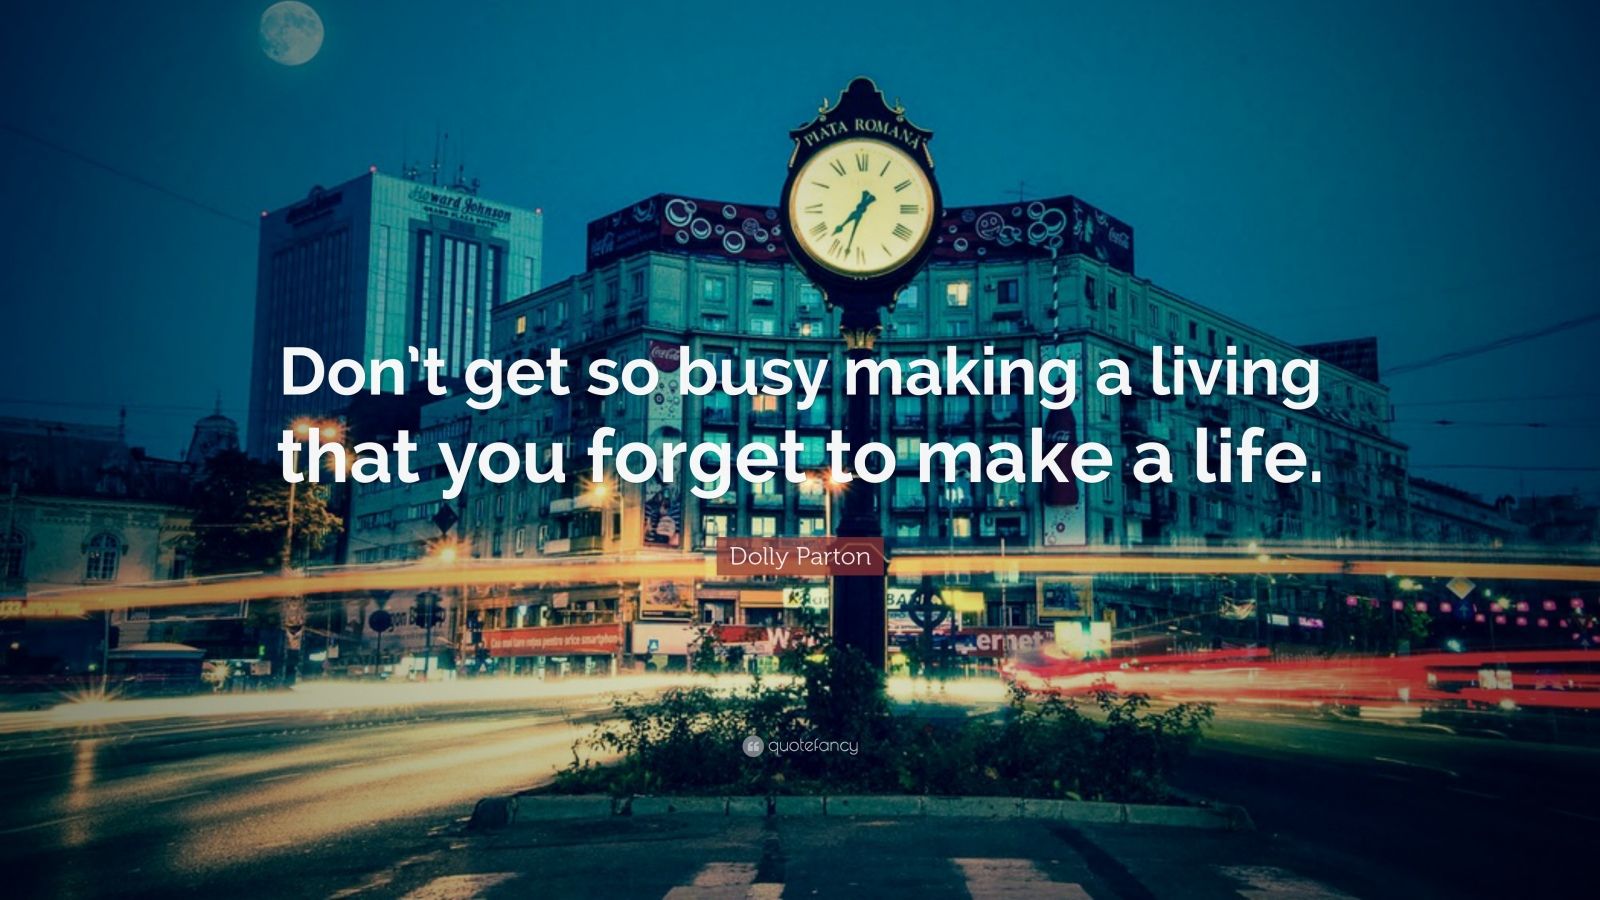 Dolly Parton Quote: “Don’t get so busy making a living that you forget ...